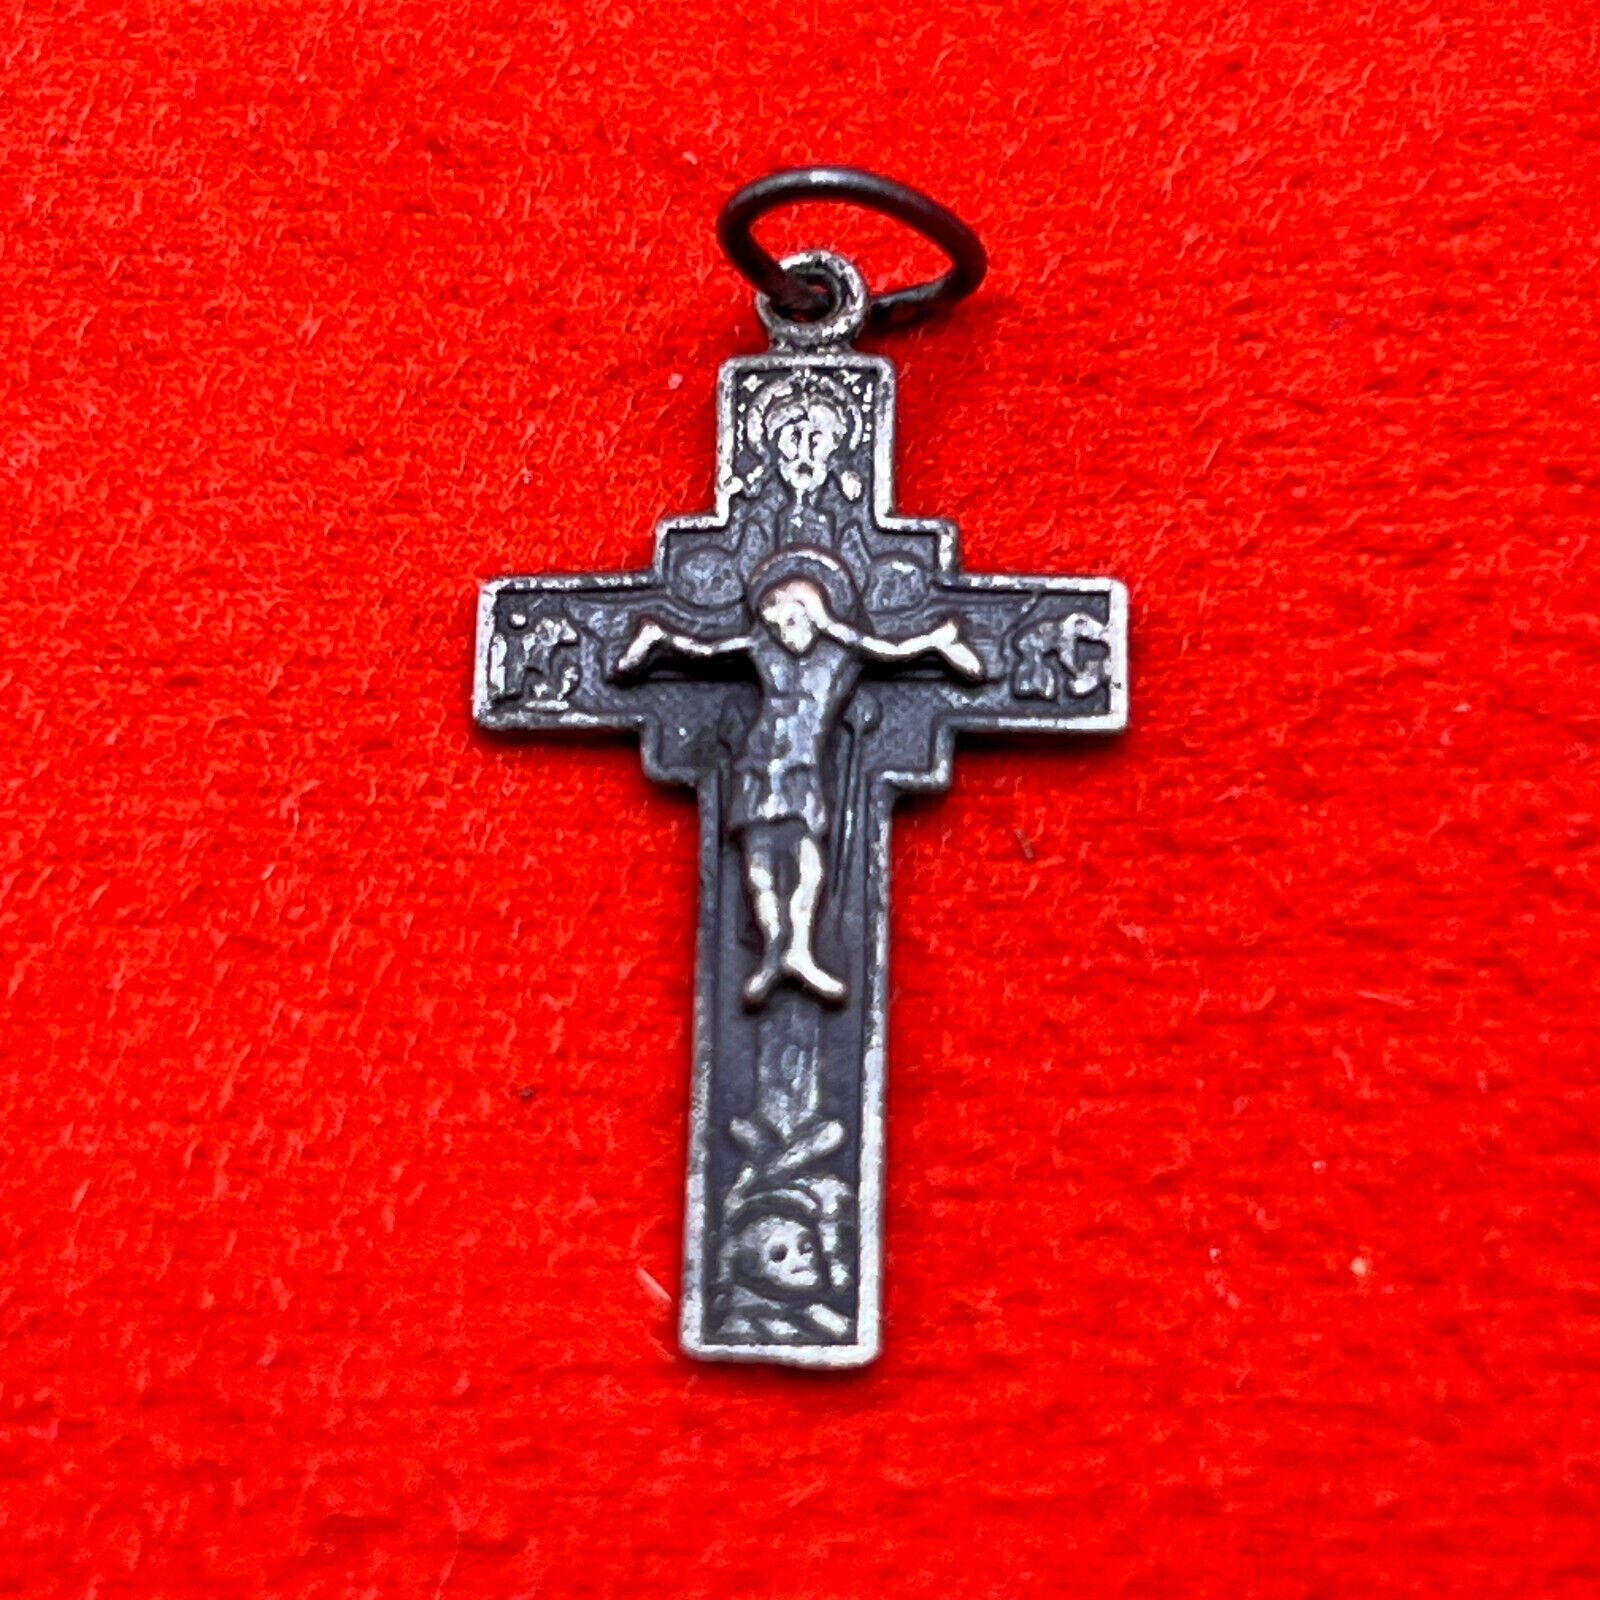 Ancient Silver Pendant Cross Antique 19-21 century Religious Archaeological find